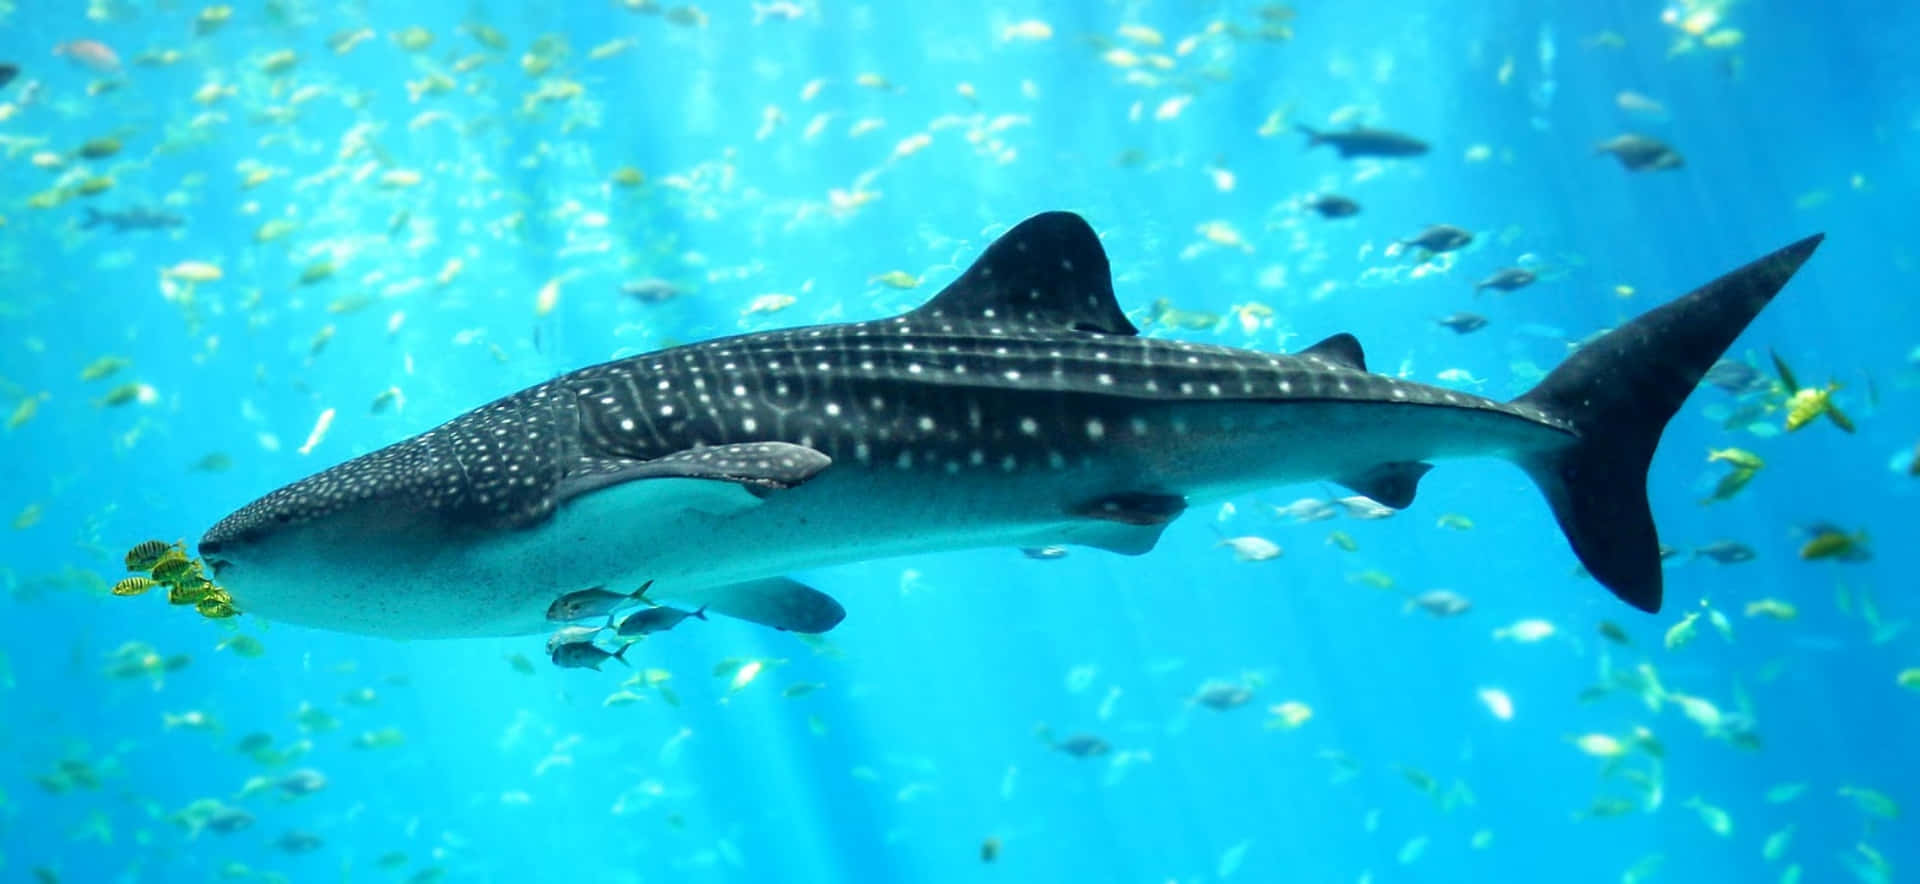 Image  A close-up of a Whale Shark in an aquatic environment